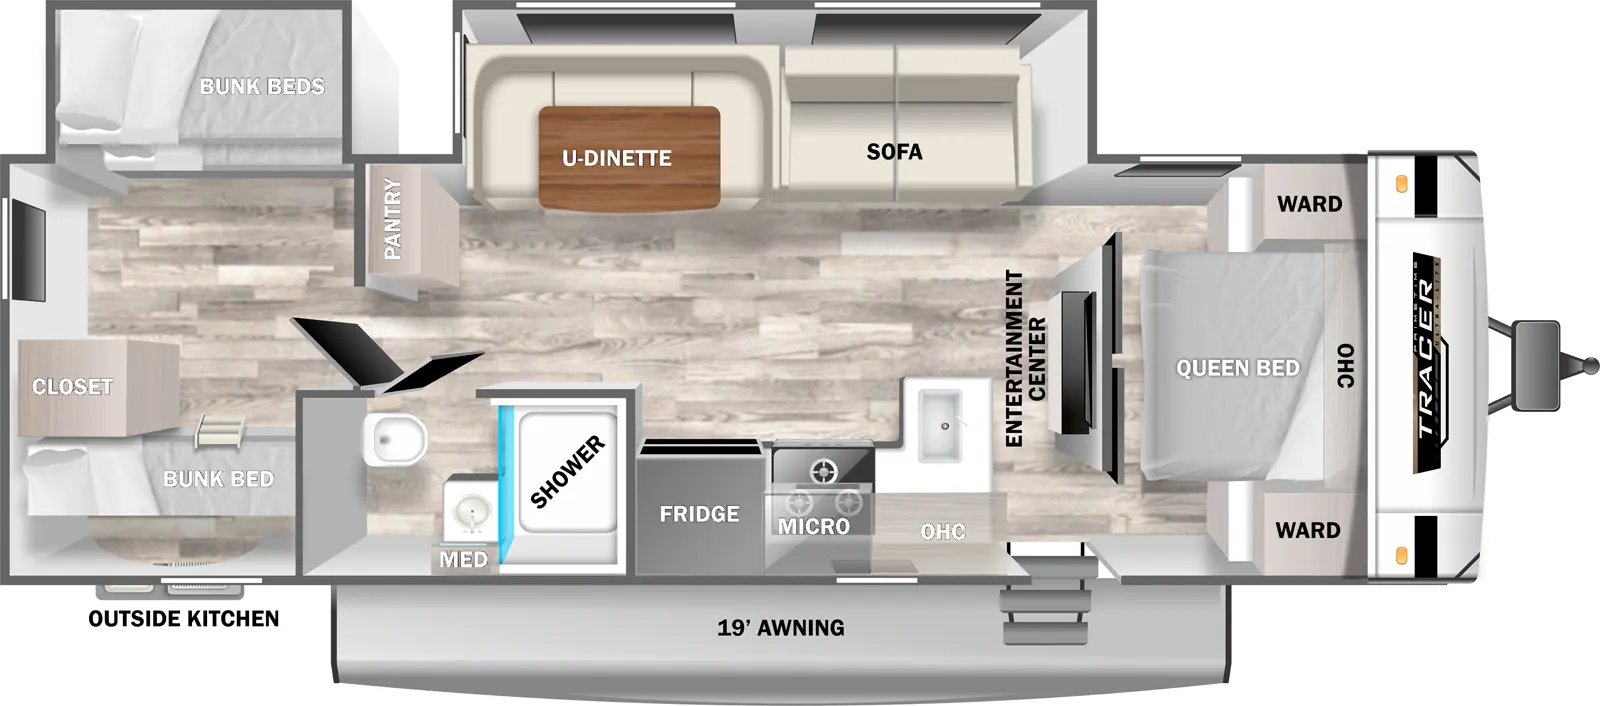 The 31BHD has two slideout and one entry. Exterior features an outside kitchen and 19 foot awning. Interior layout front to back: foot-facing queen bed with overhead cabinet and wardrobes on each side; entertainment center along island inner wall; off-door side slideout with sofa and u-dinette, and pantry; entry, peninsula kitchen counter with sink wraps to door side with overhead cabinet, microwave, cooktop, and refrigerator; door side full bathroom with medicine cabinet; rear bunk room with off-door side bunk bed slideout, and door side bunk beds and closet.